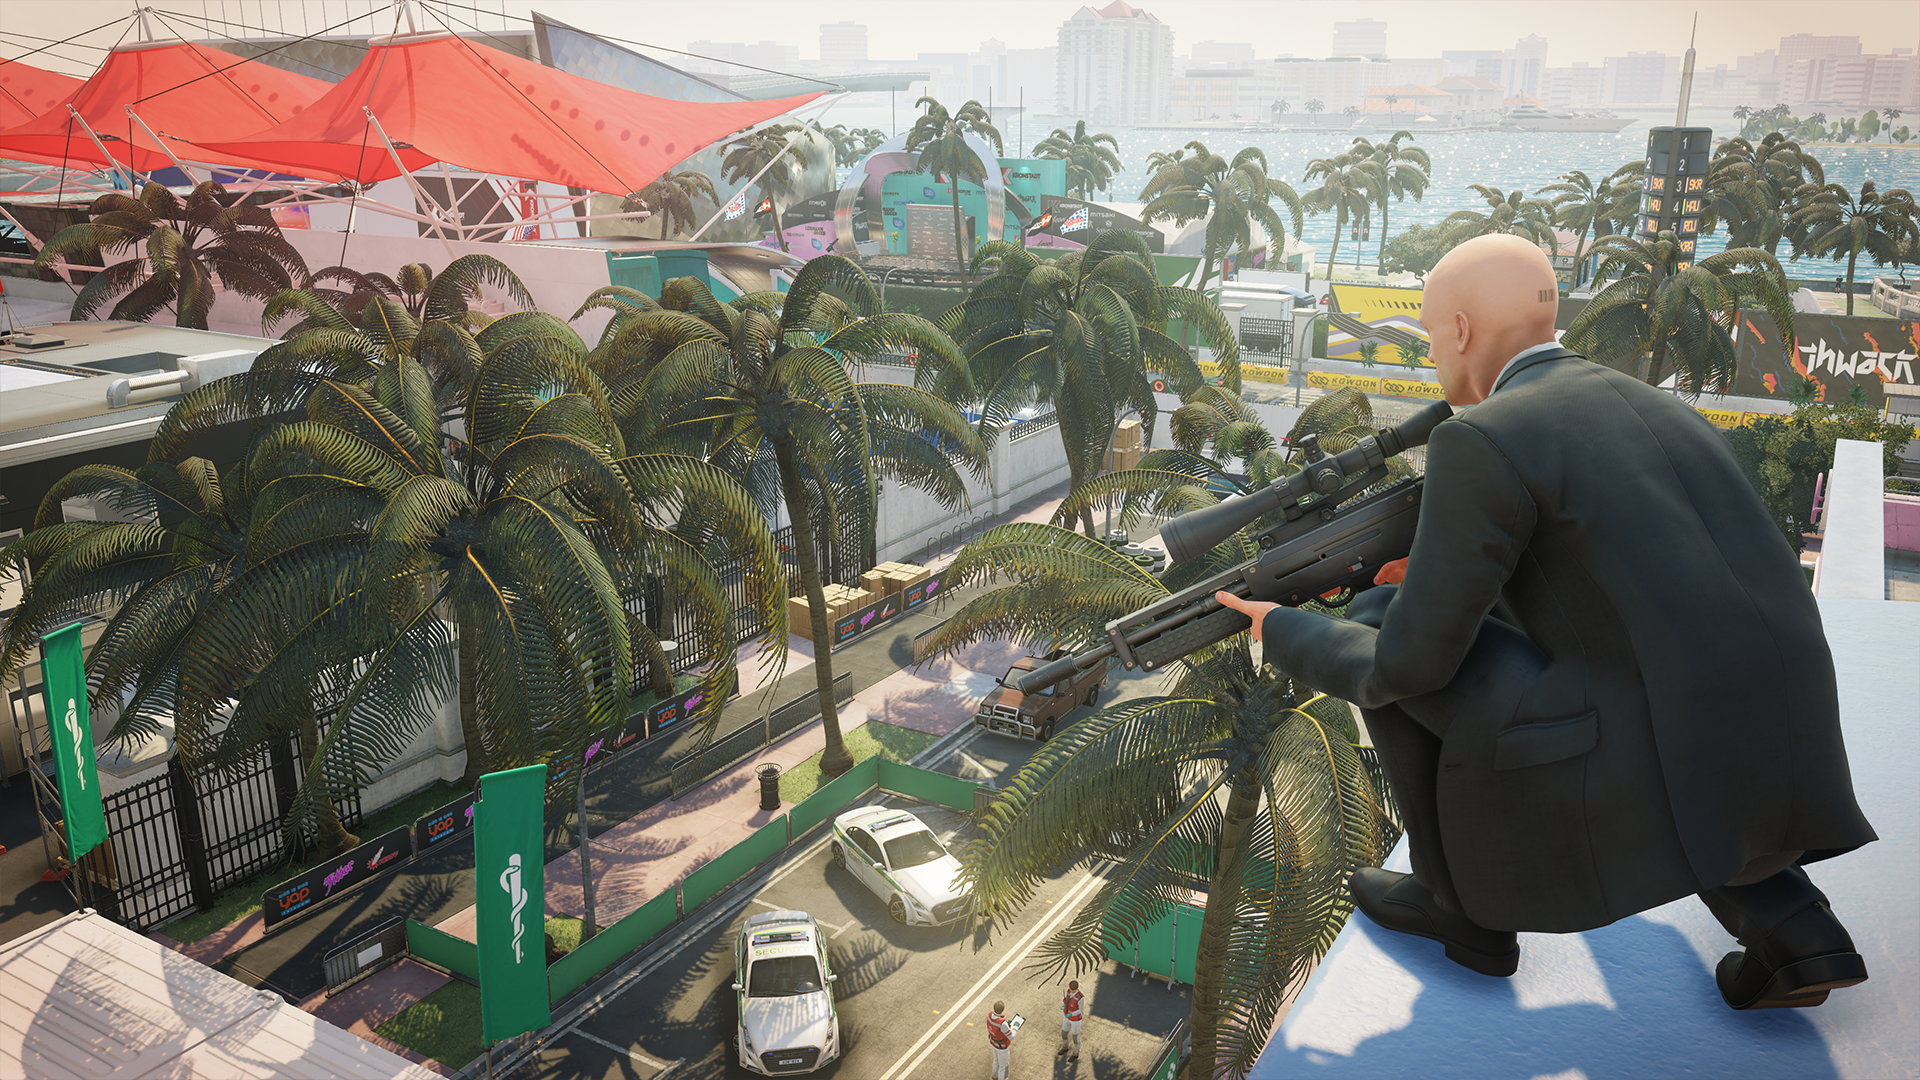 does hitman 2 come with hitman 1